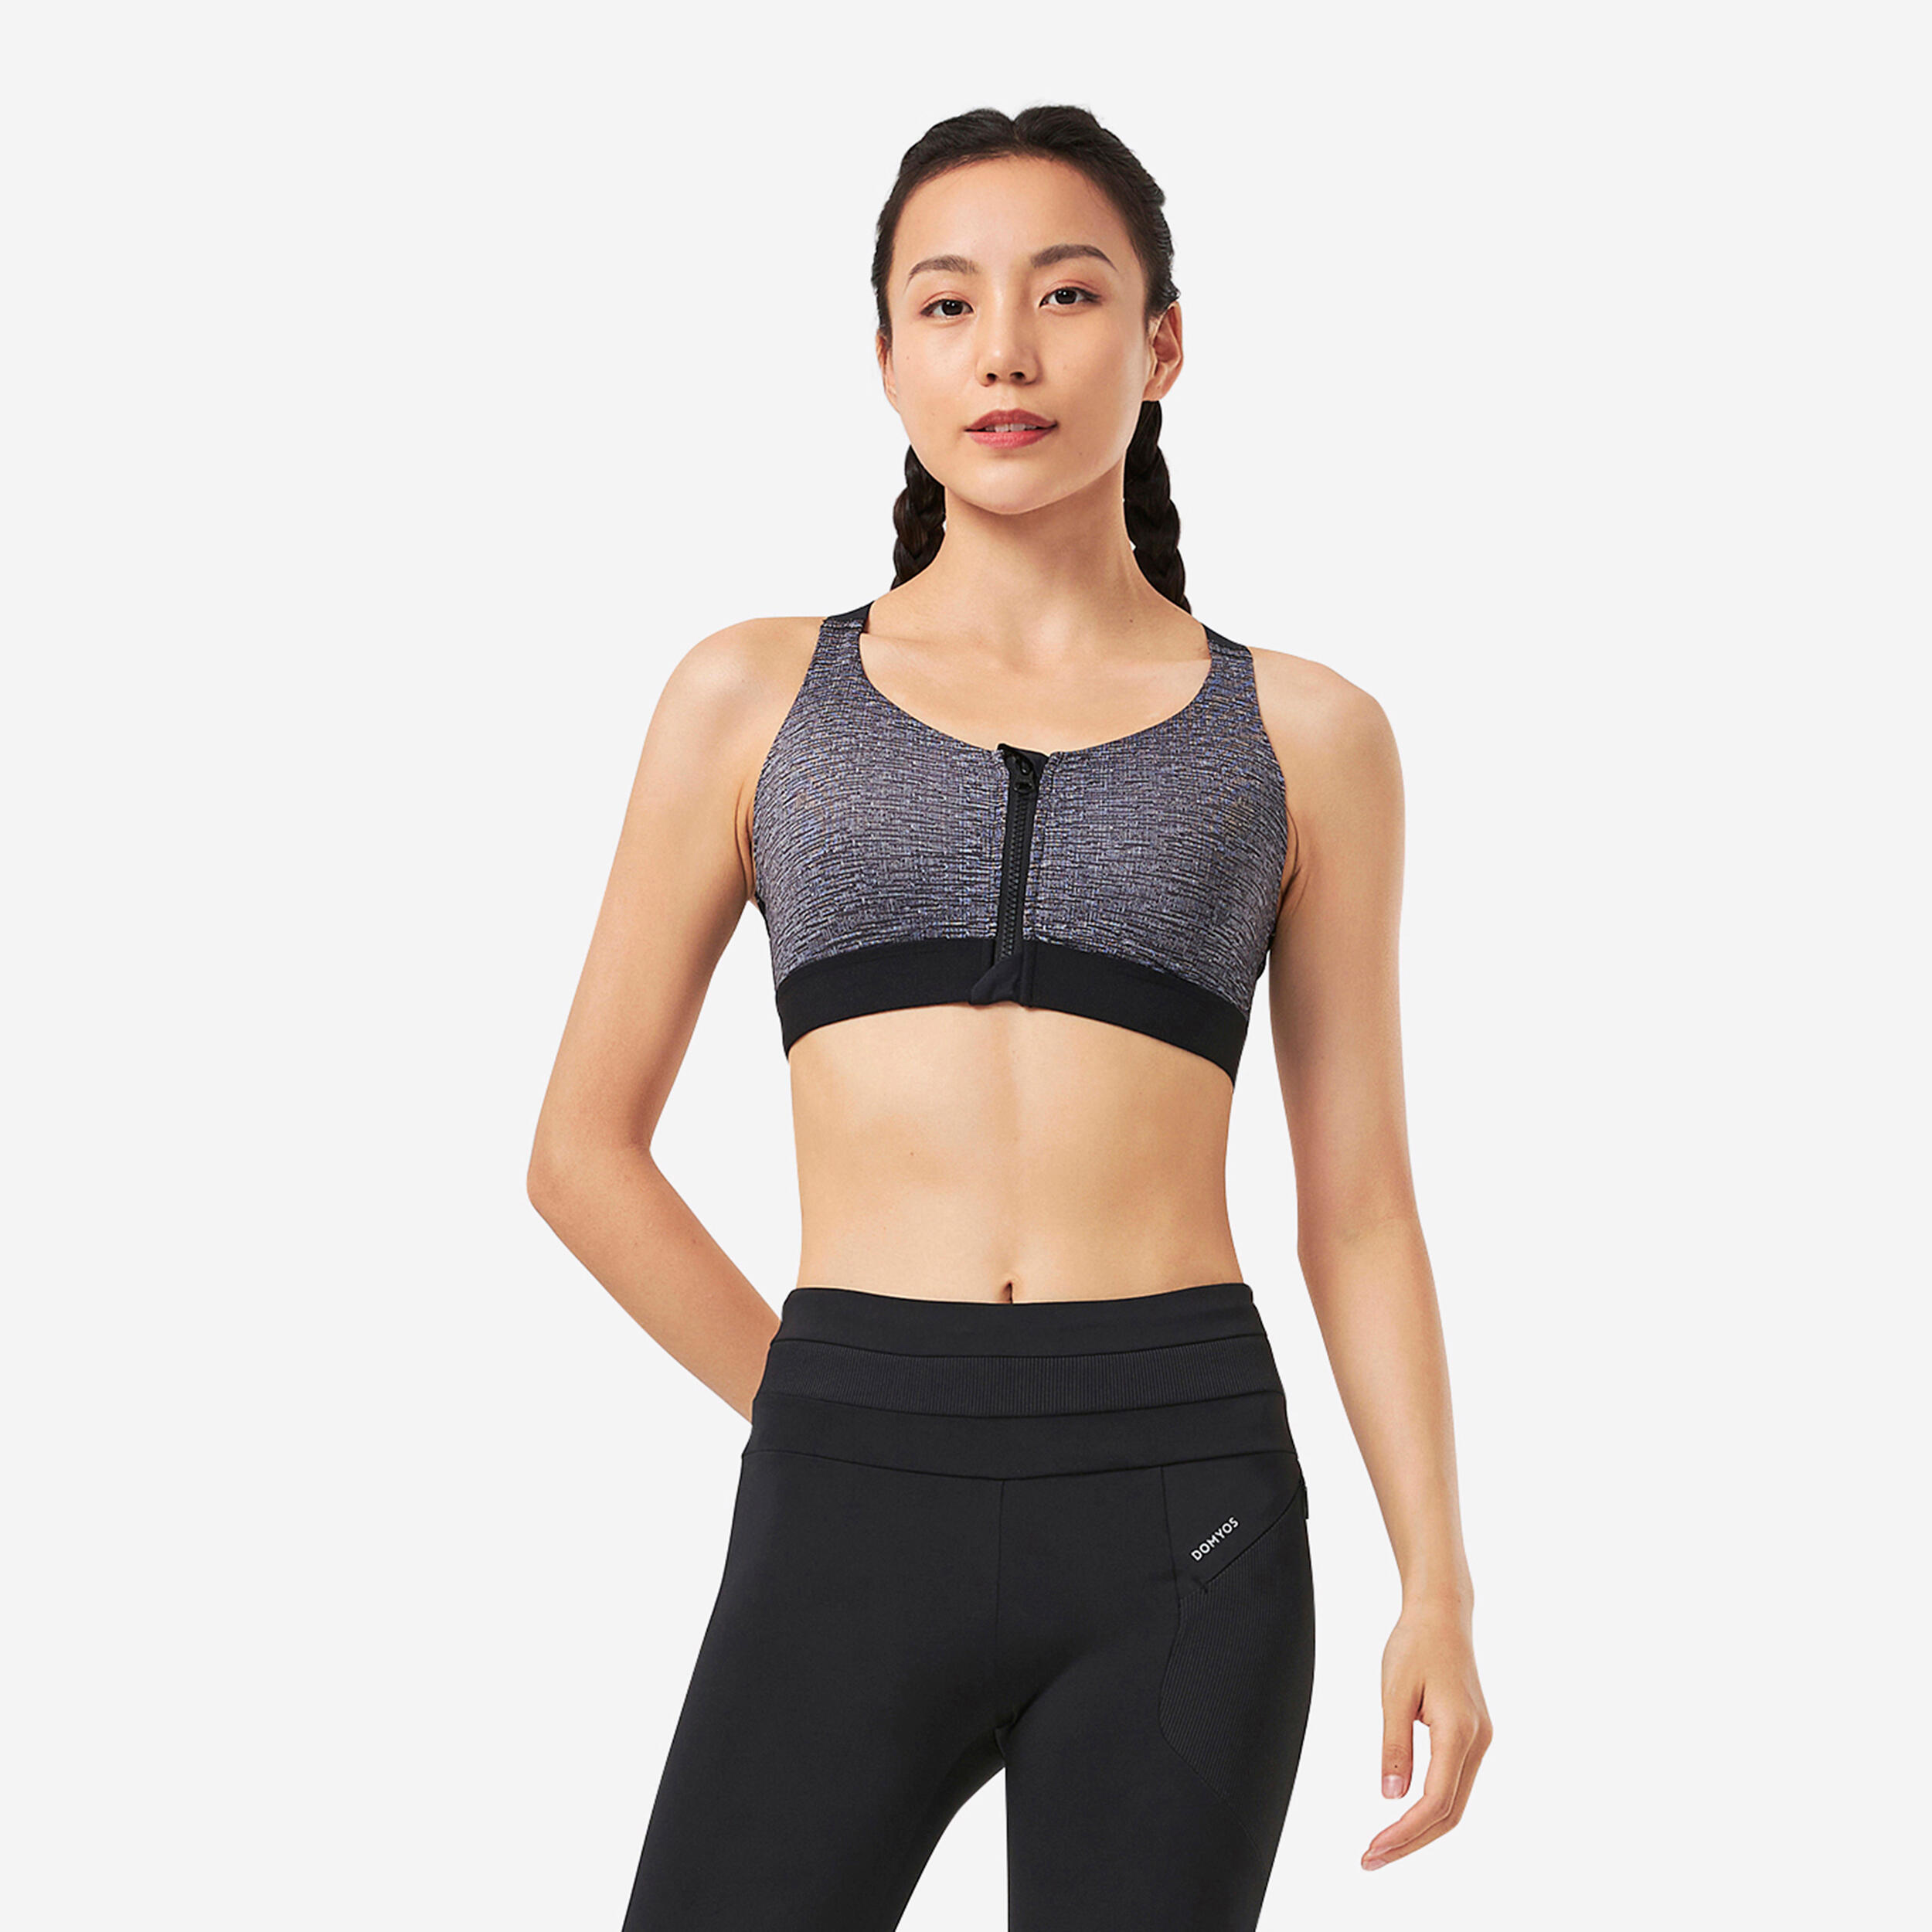 DOMYOS Women's High Support Zip-Up Sports Bra with Cups - Grey/Black